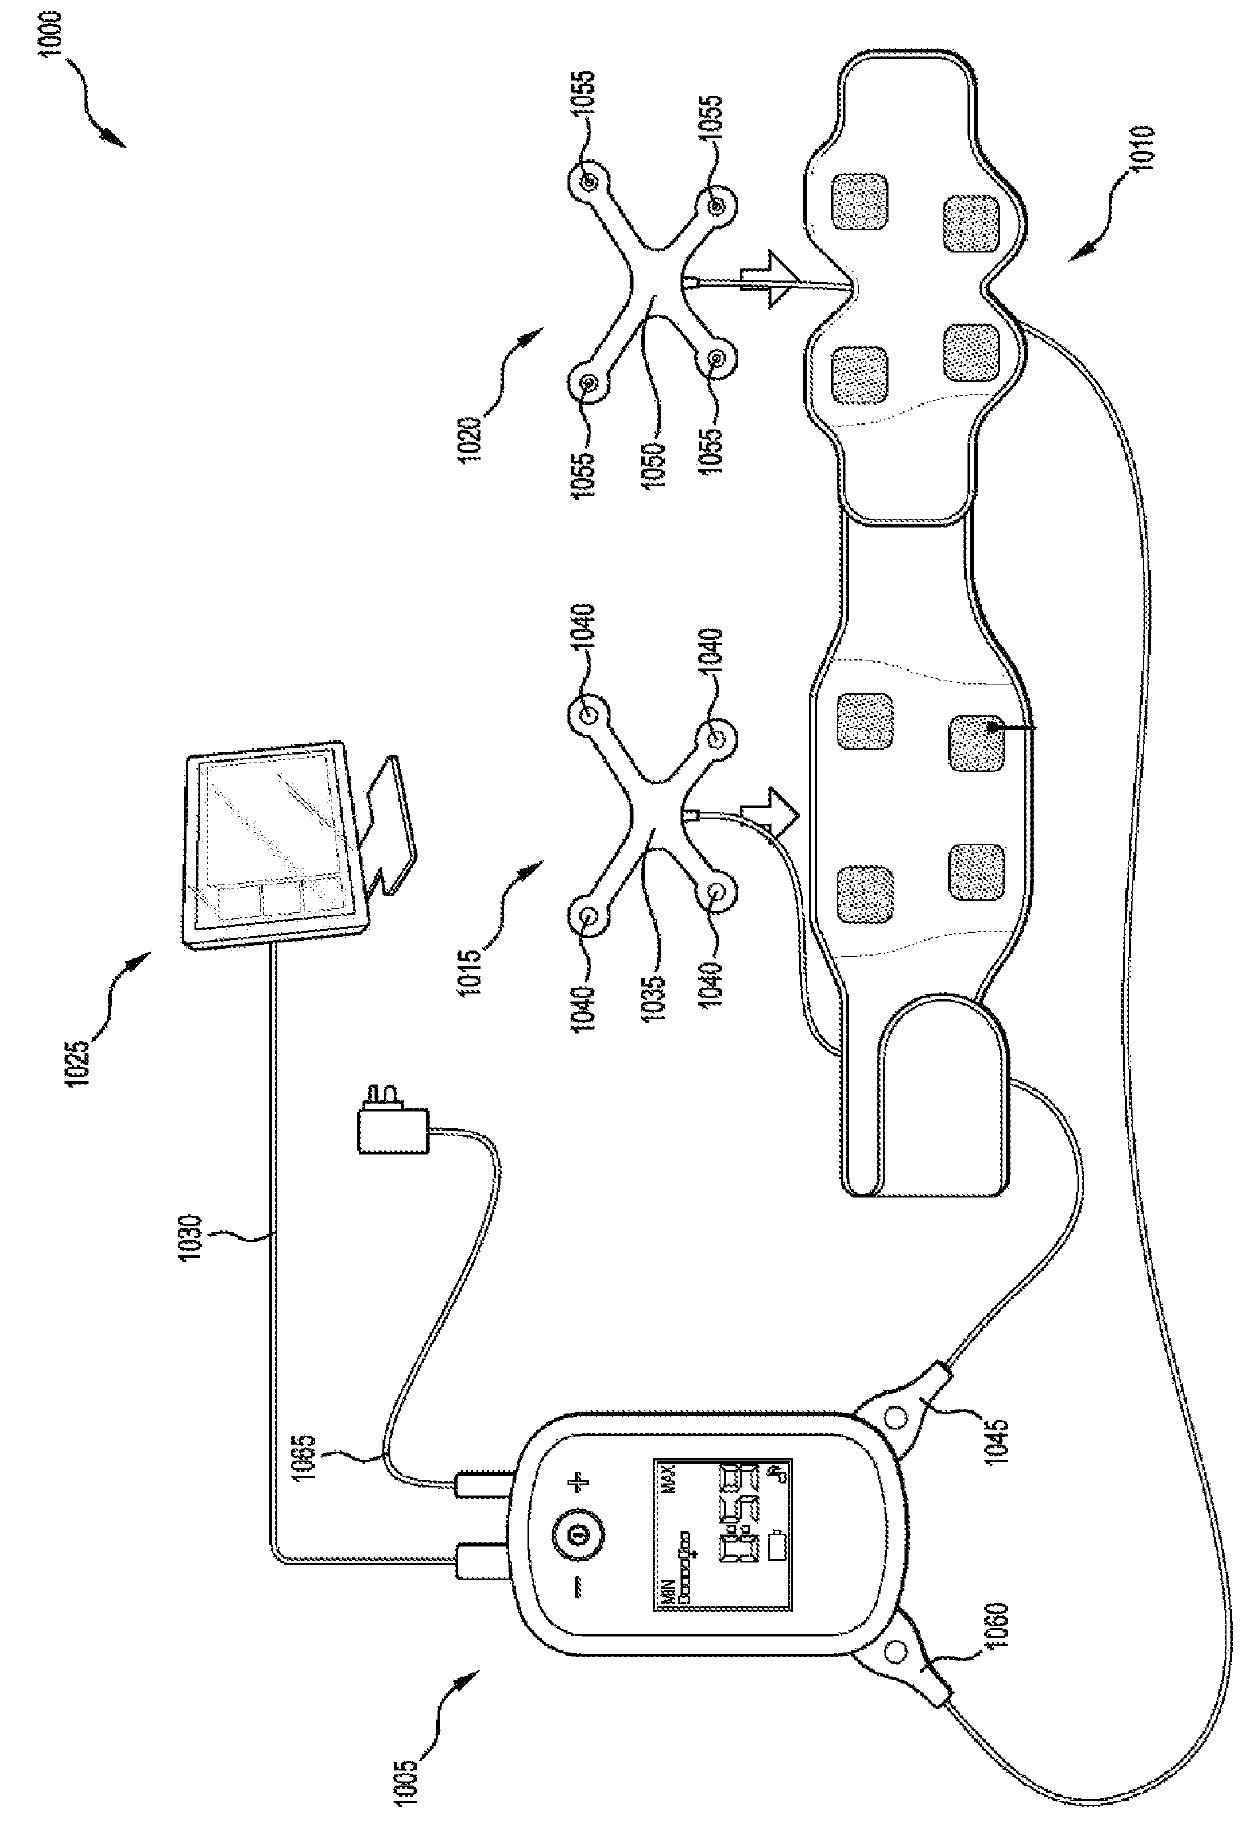 System, device and garment for delivering transcutaneous electrical stimulation